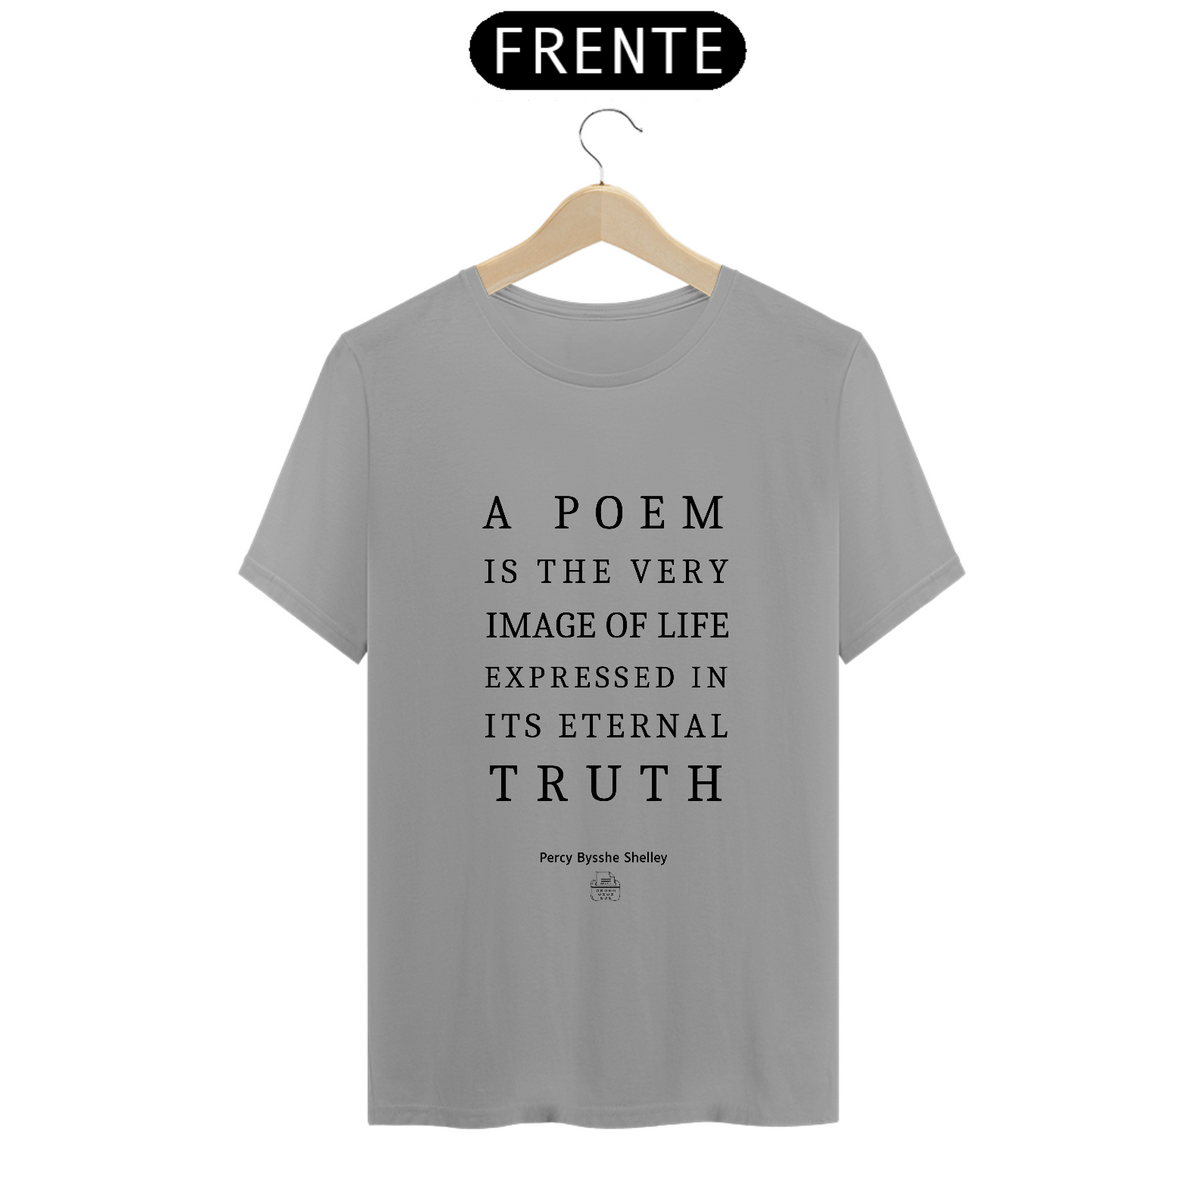 Nome do produto: A poem is the very image of life, Percy B. Shelley TShirt Quality (Branca/Cinza)